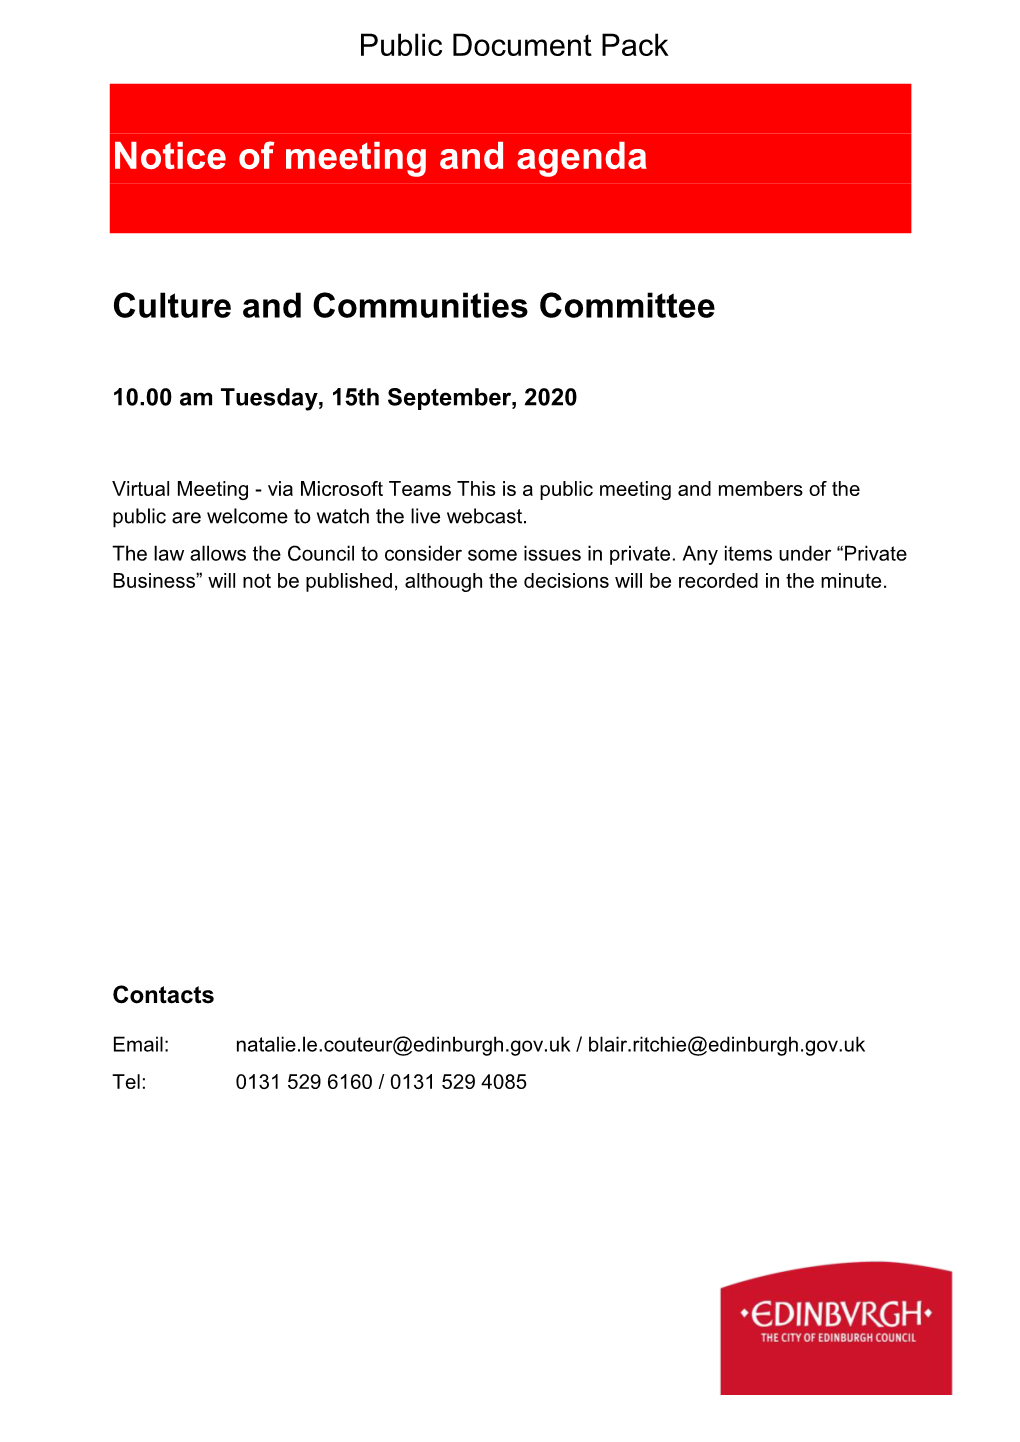 (Public Pack)Agenda Document for Culture and Communities